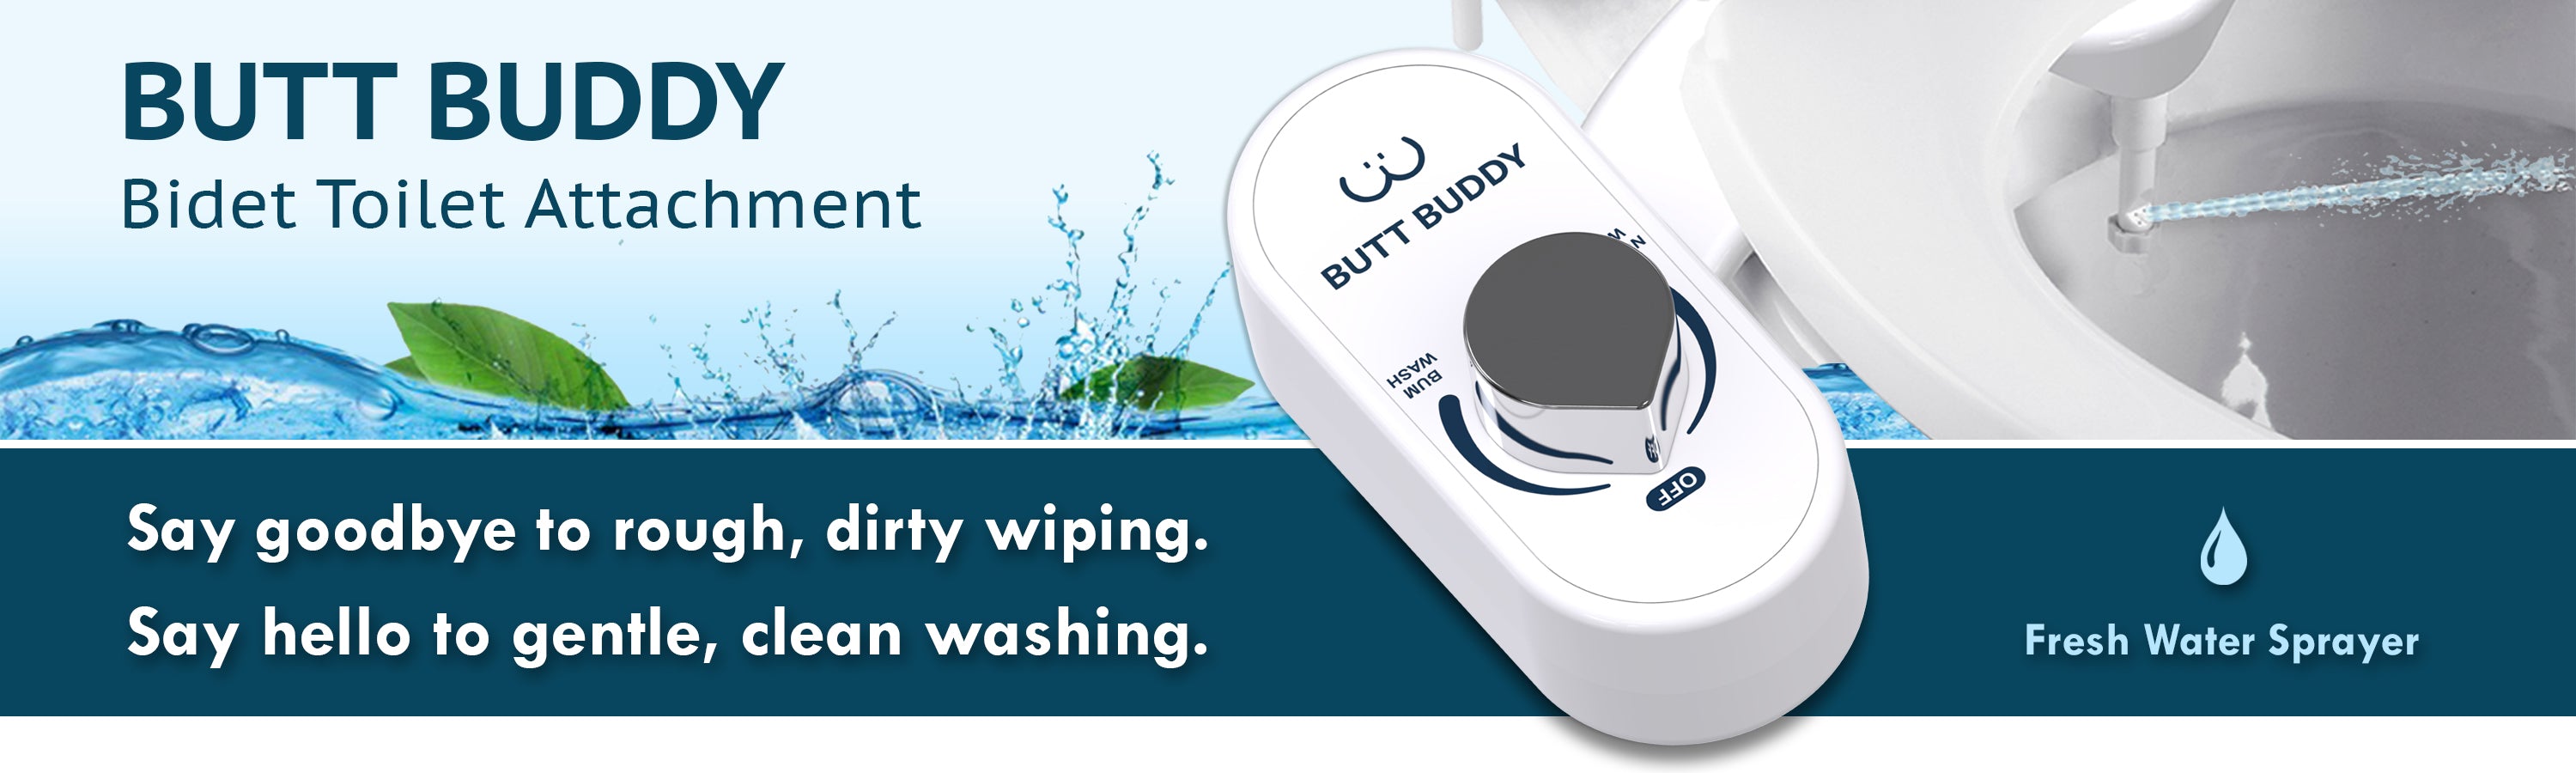 In My Bathroom - IMB - Butt Buddy - Bidet Toilet Attachment - Fresh Water Sprayer - Stop Dirty Wiping - Start Clean Washing - Product Banner - BBB